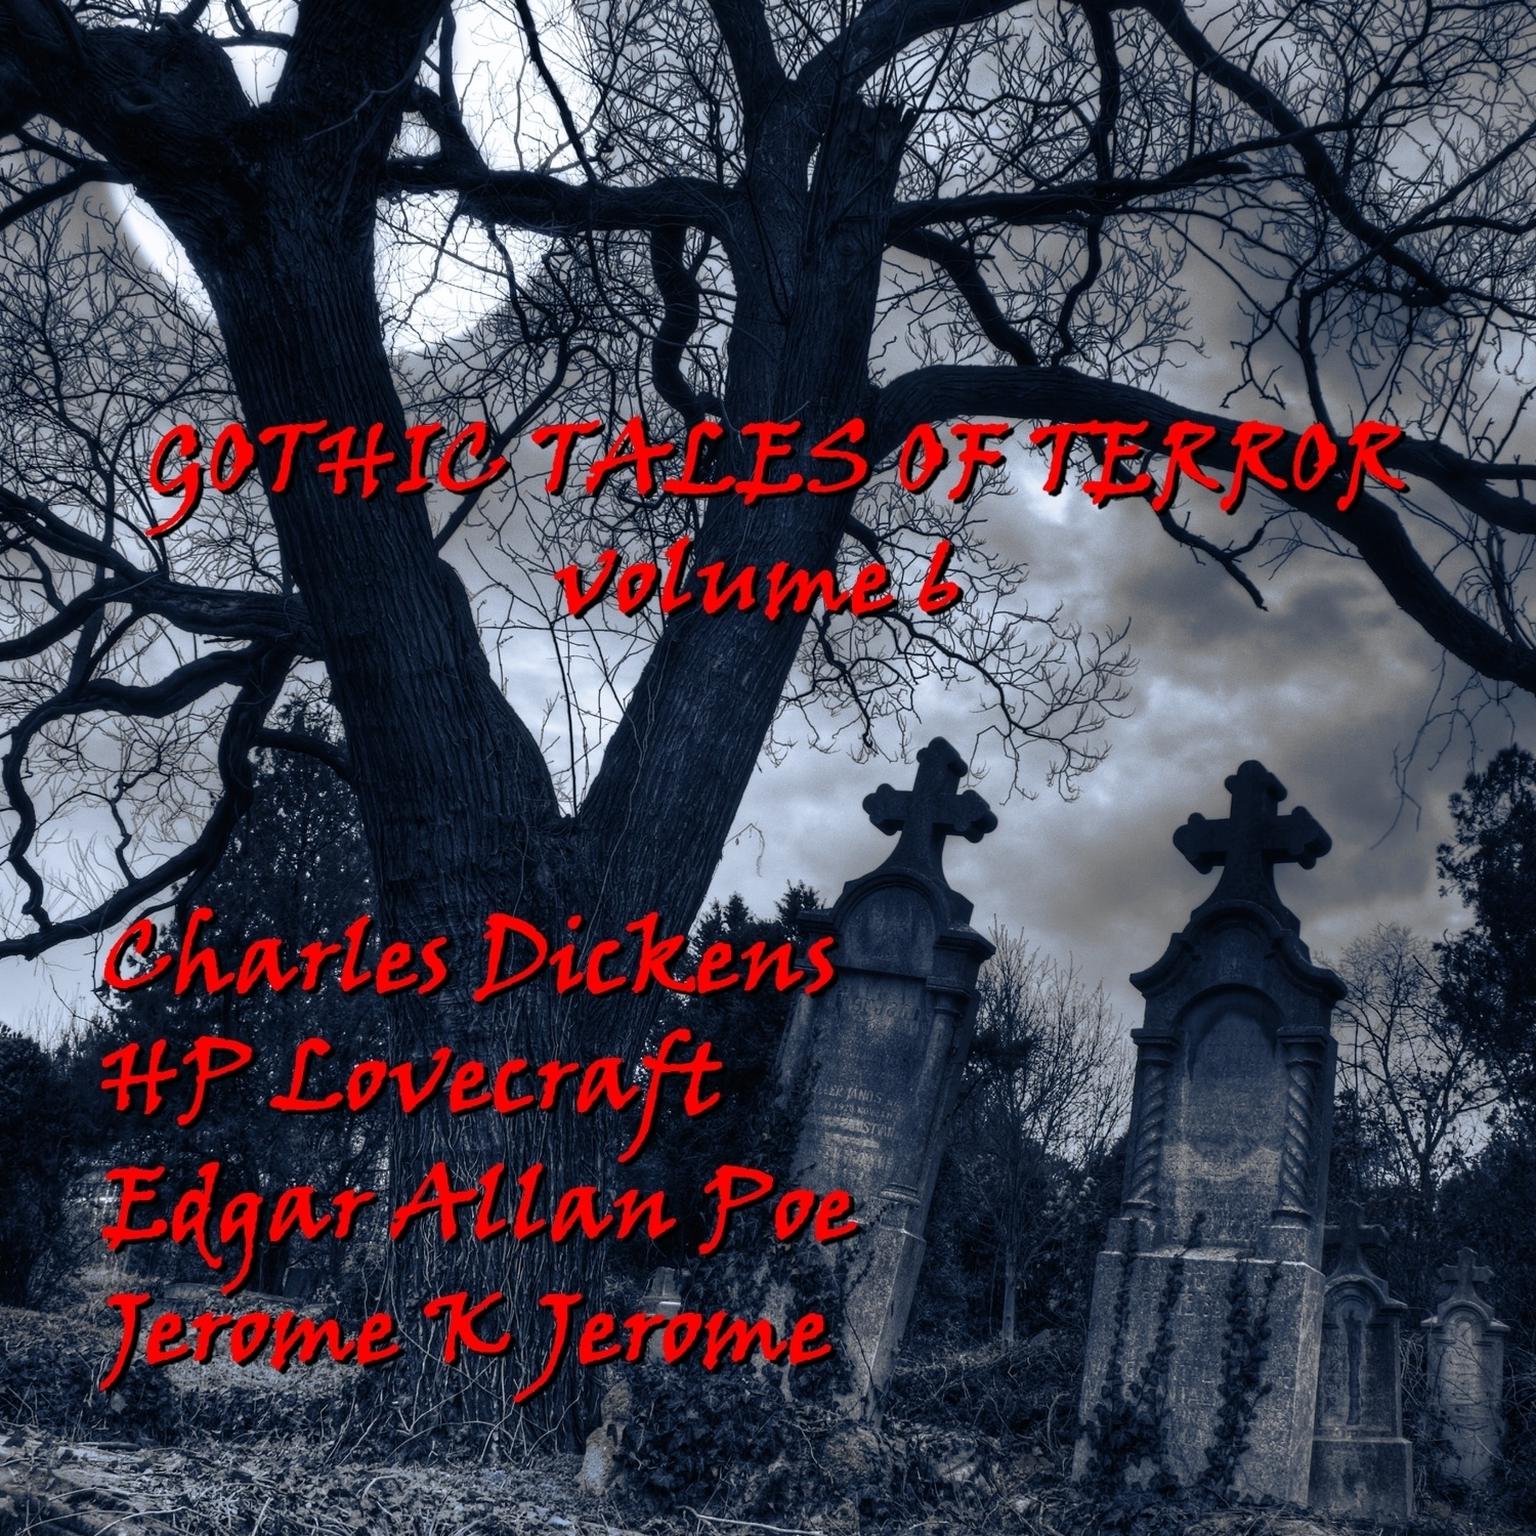 Gothic Tales of Terror, Vol. 6 (Abridged) Audiobook, by various authors